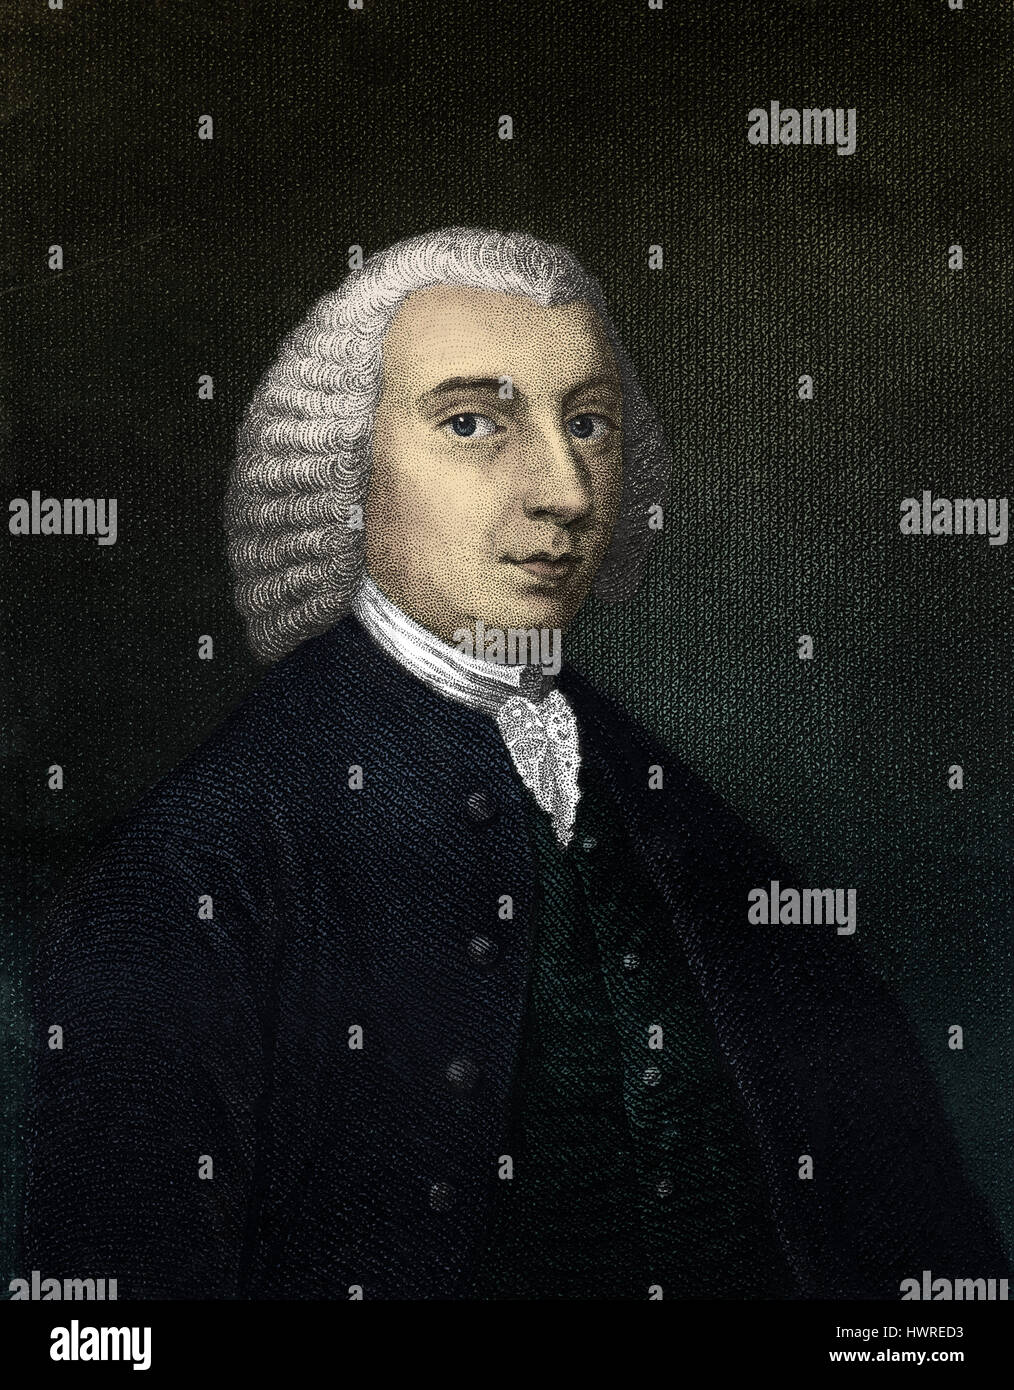 Tobias Smollett, portrait. Scottish poet and author, 19 March 1721 – 17 September 1771. After the engraving by E.Scriven. Stock Photo